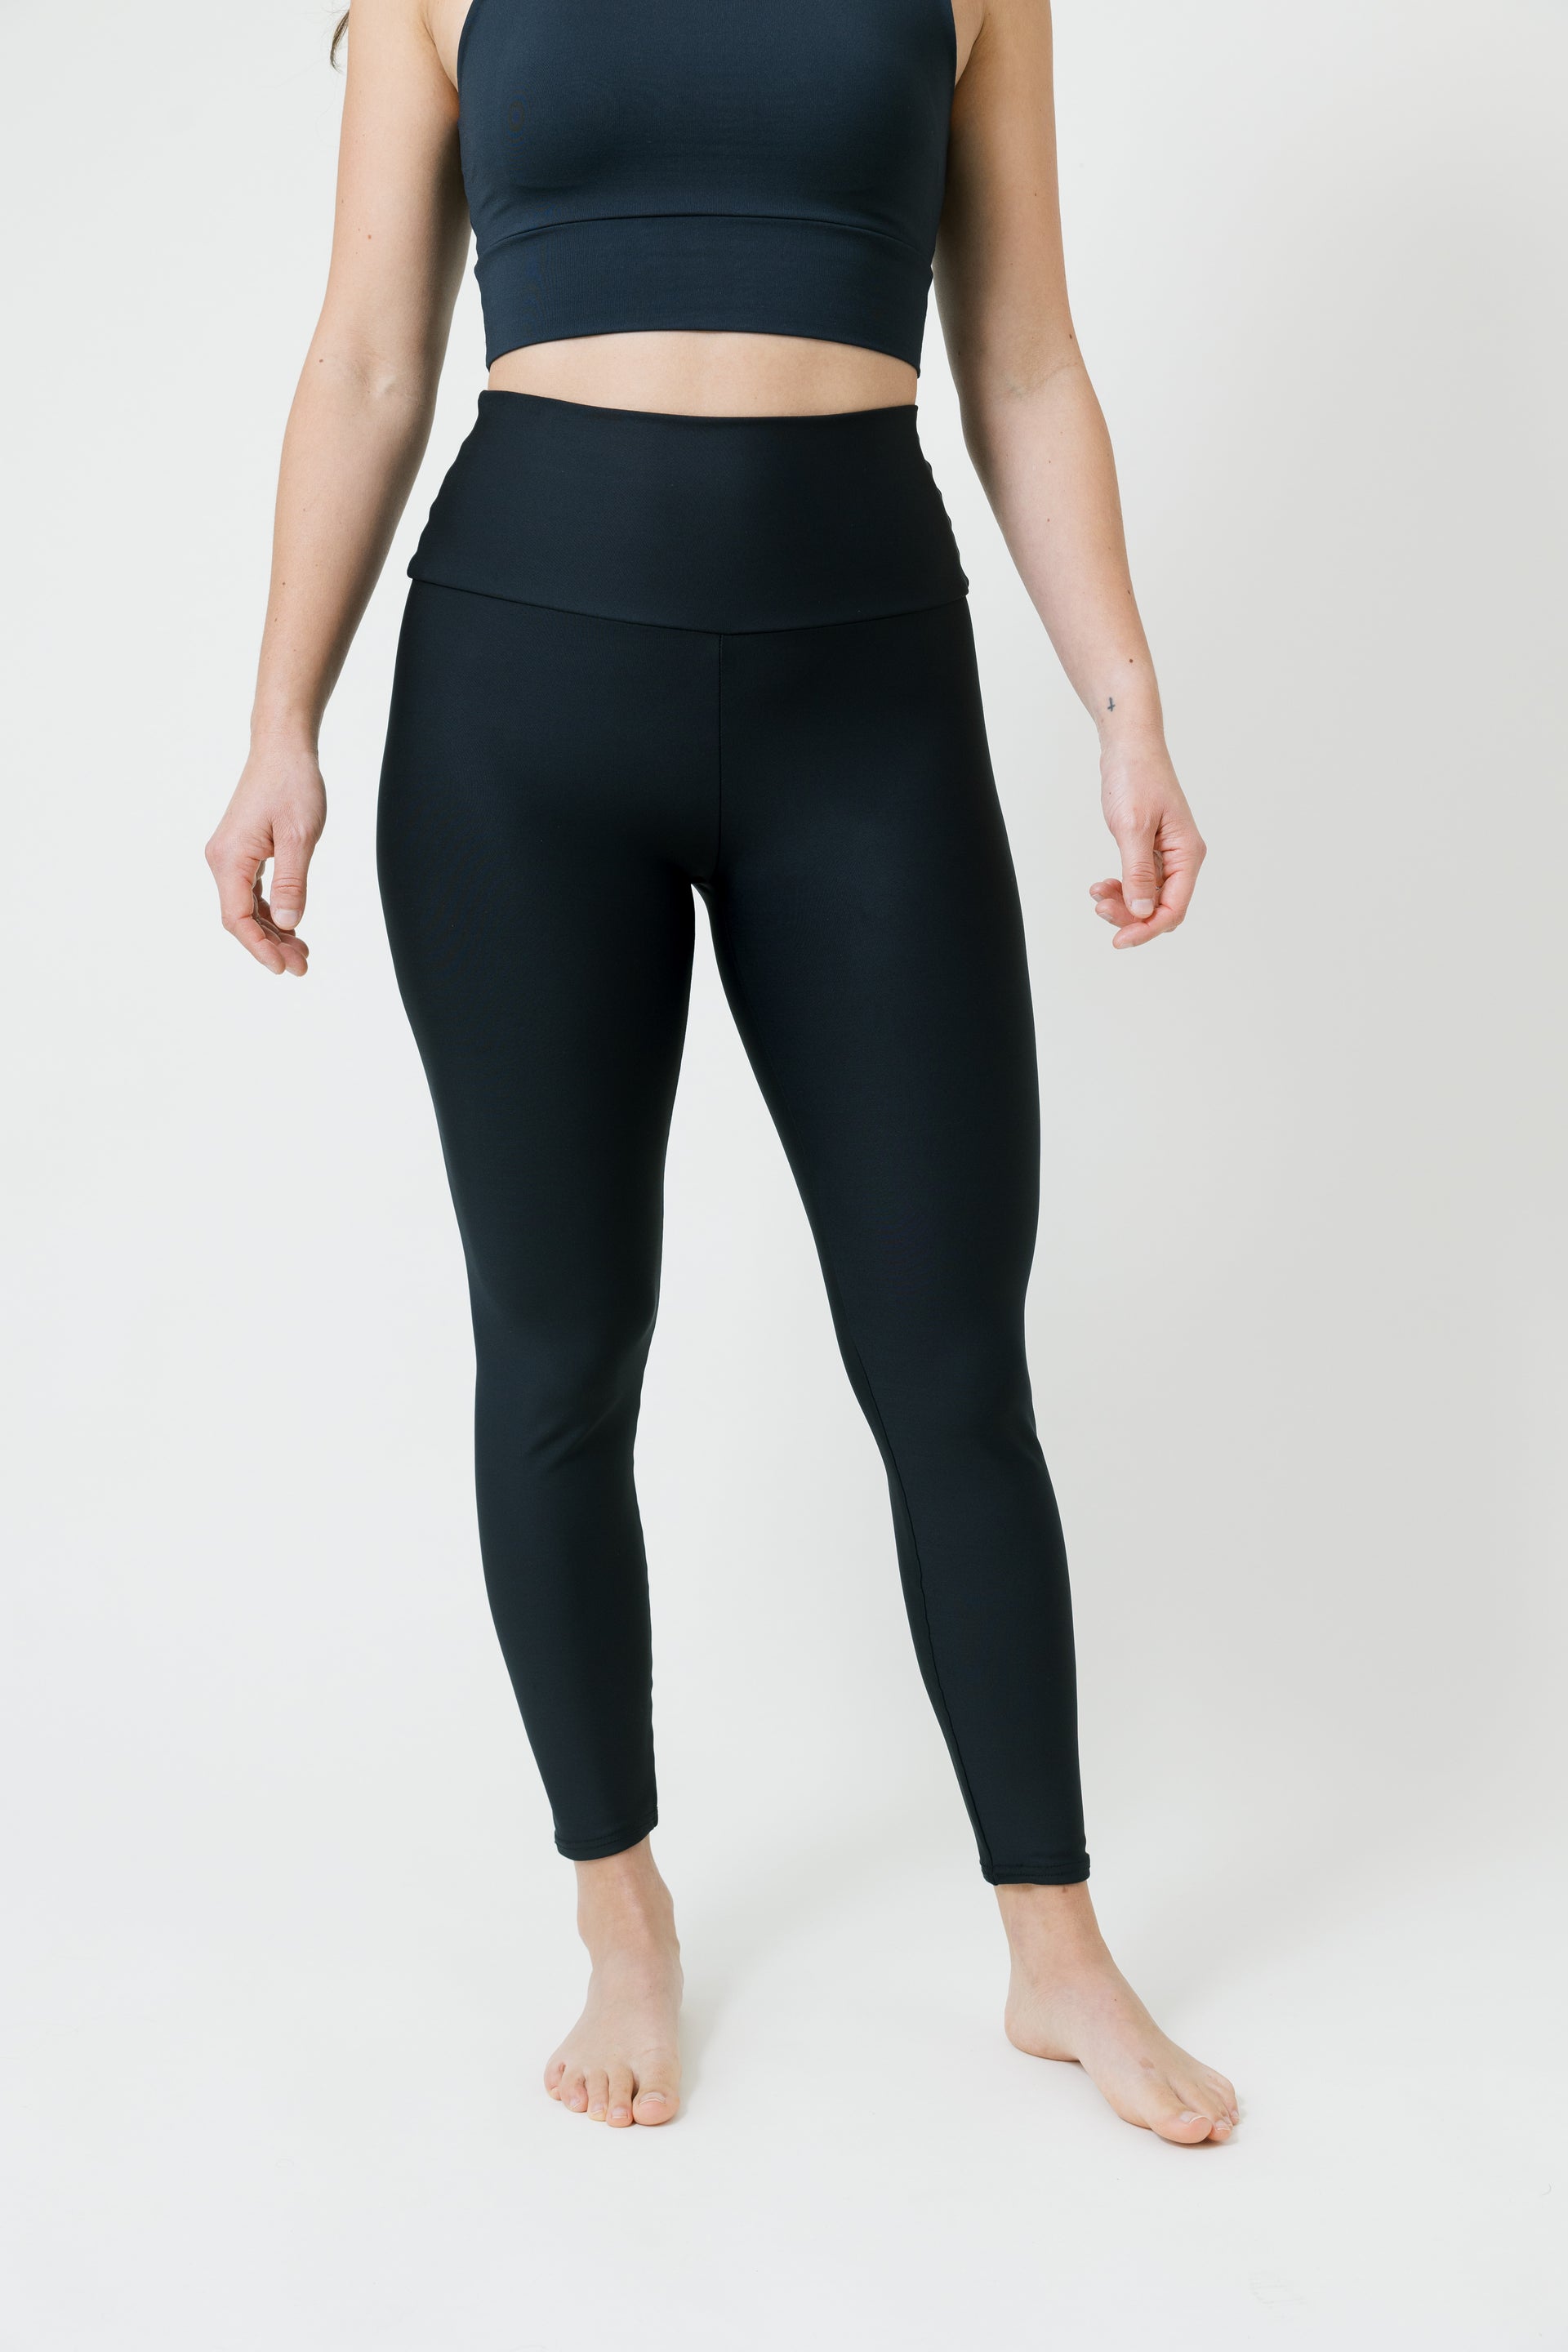  Conceited Olive Premium Ultra Soft High Waisted Leggings For  Women